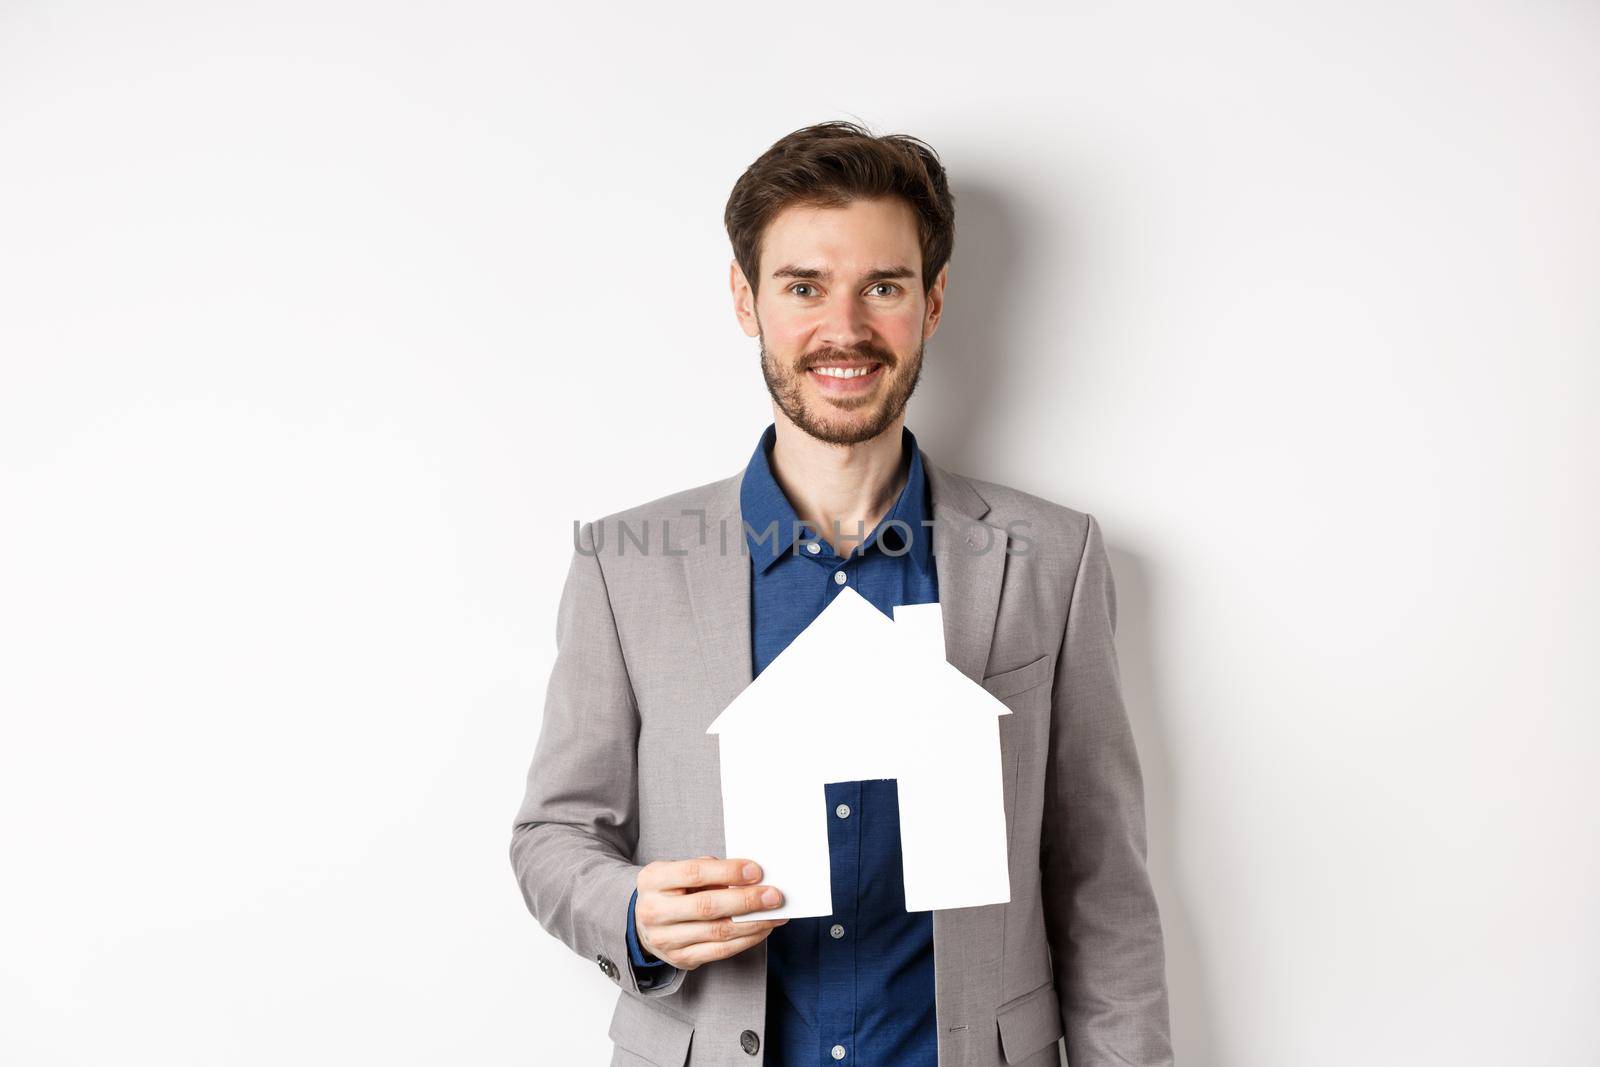 Real estate. Handsome young businessman buying property, holding paper house cutout and smiling, agency advertisement, white background.